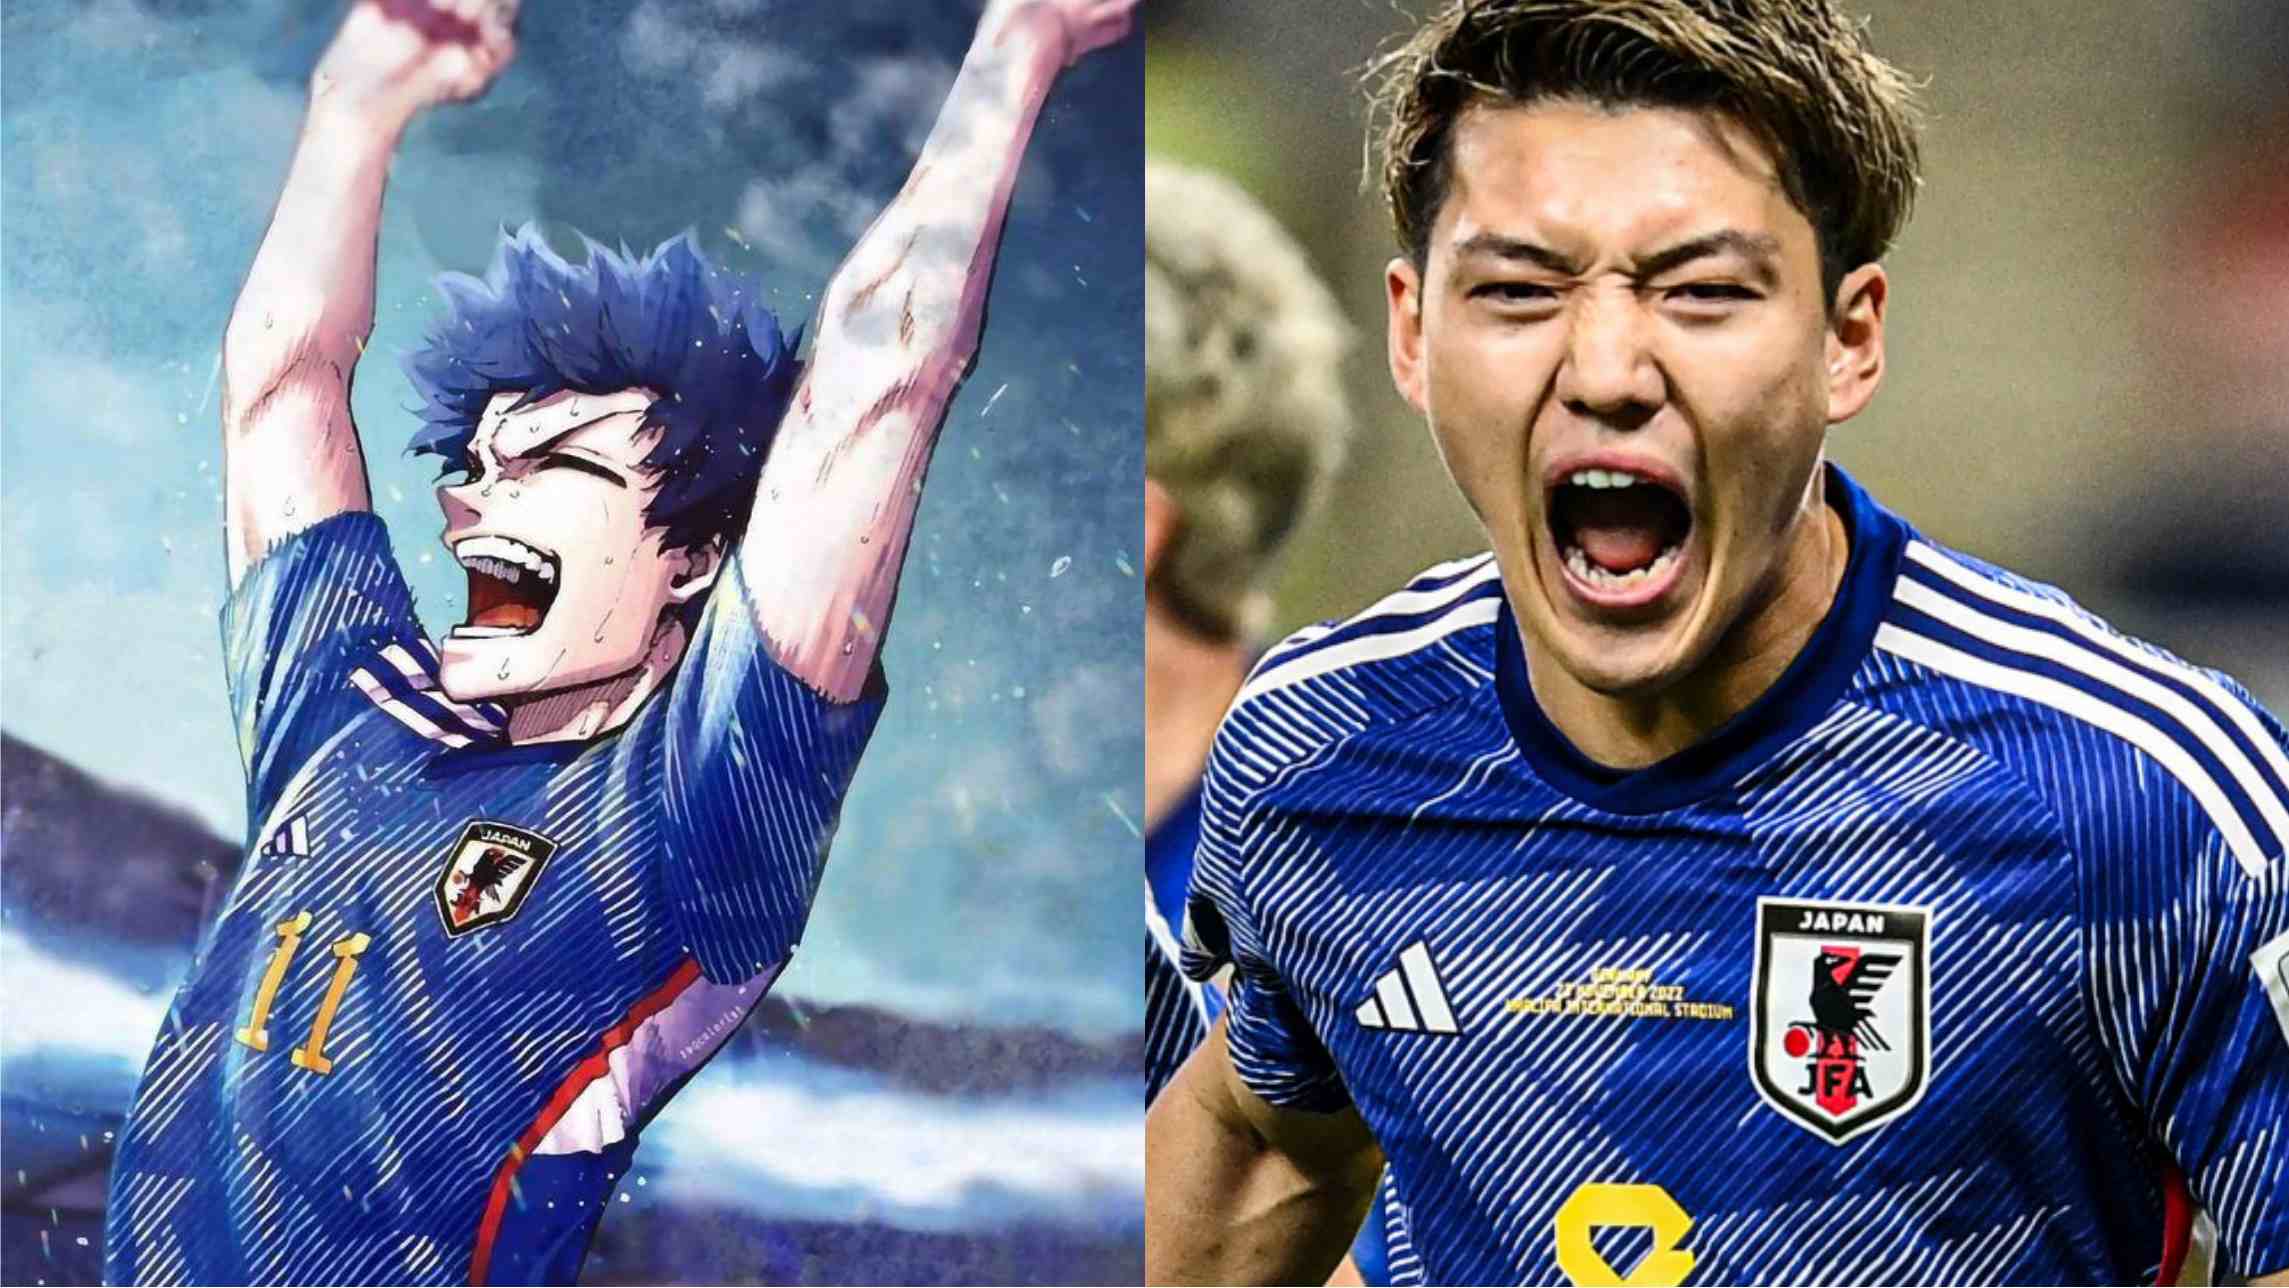 Japan makes World Cup miracles happen in Blue Lock jerseys